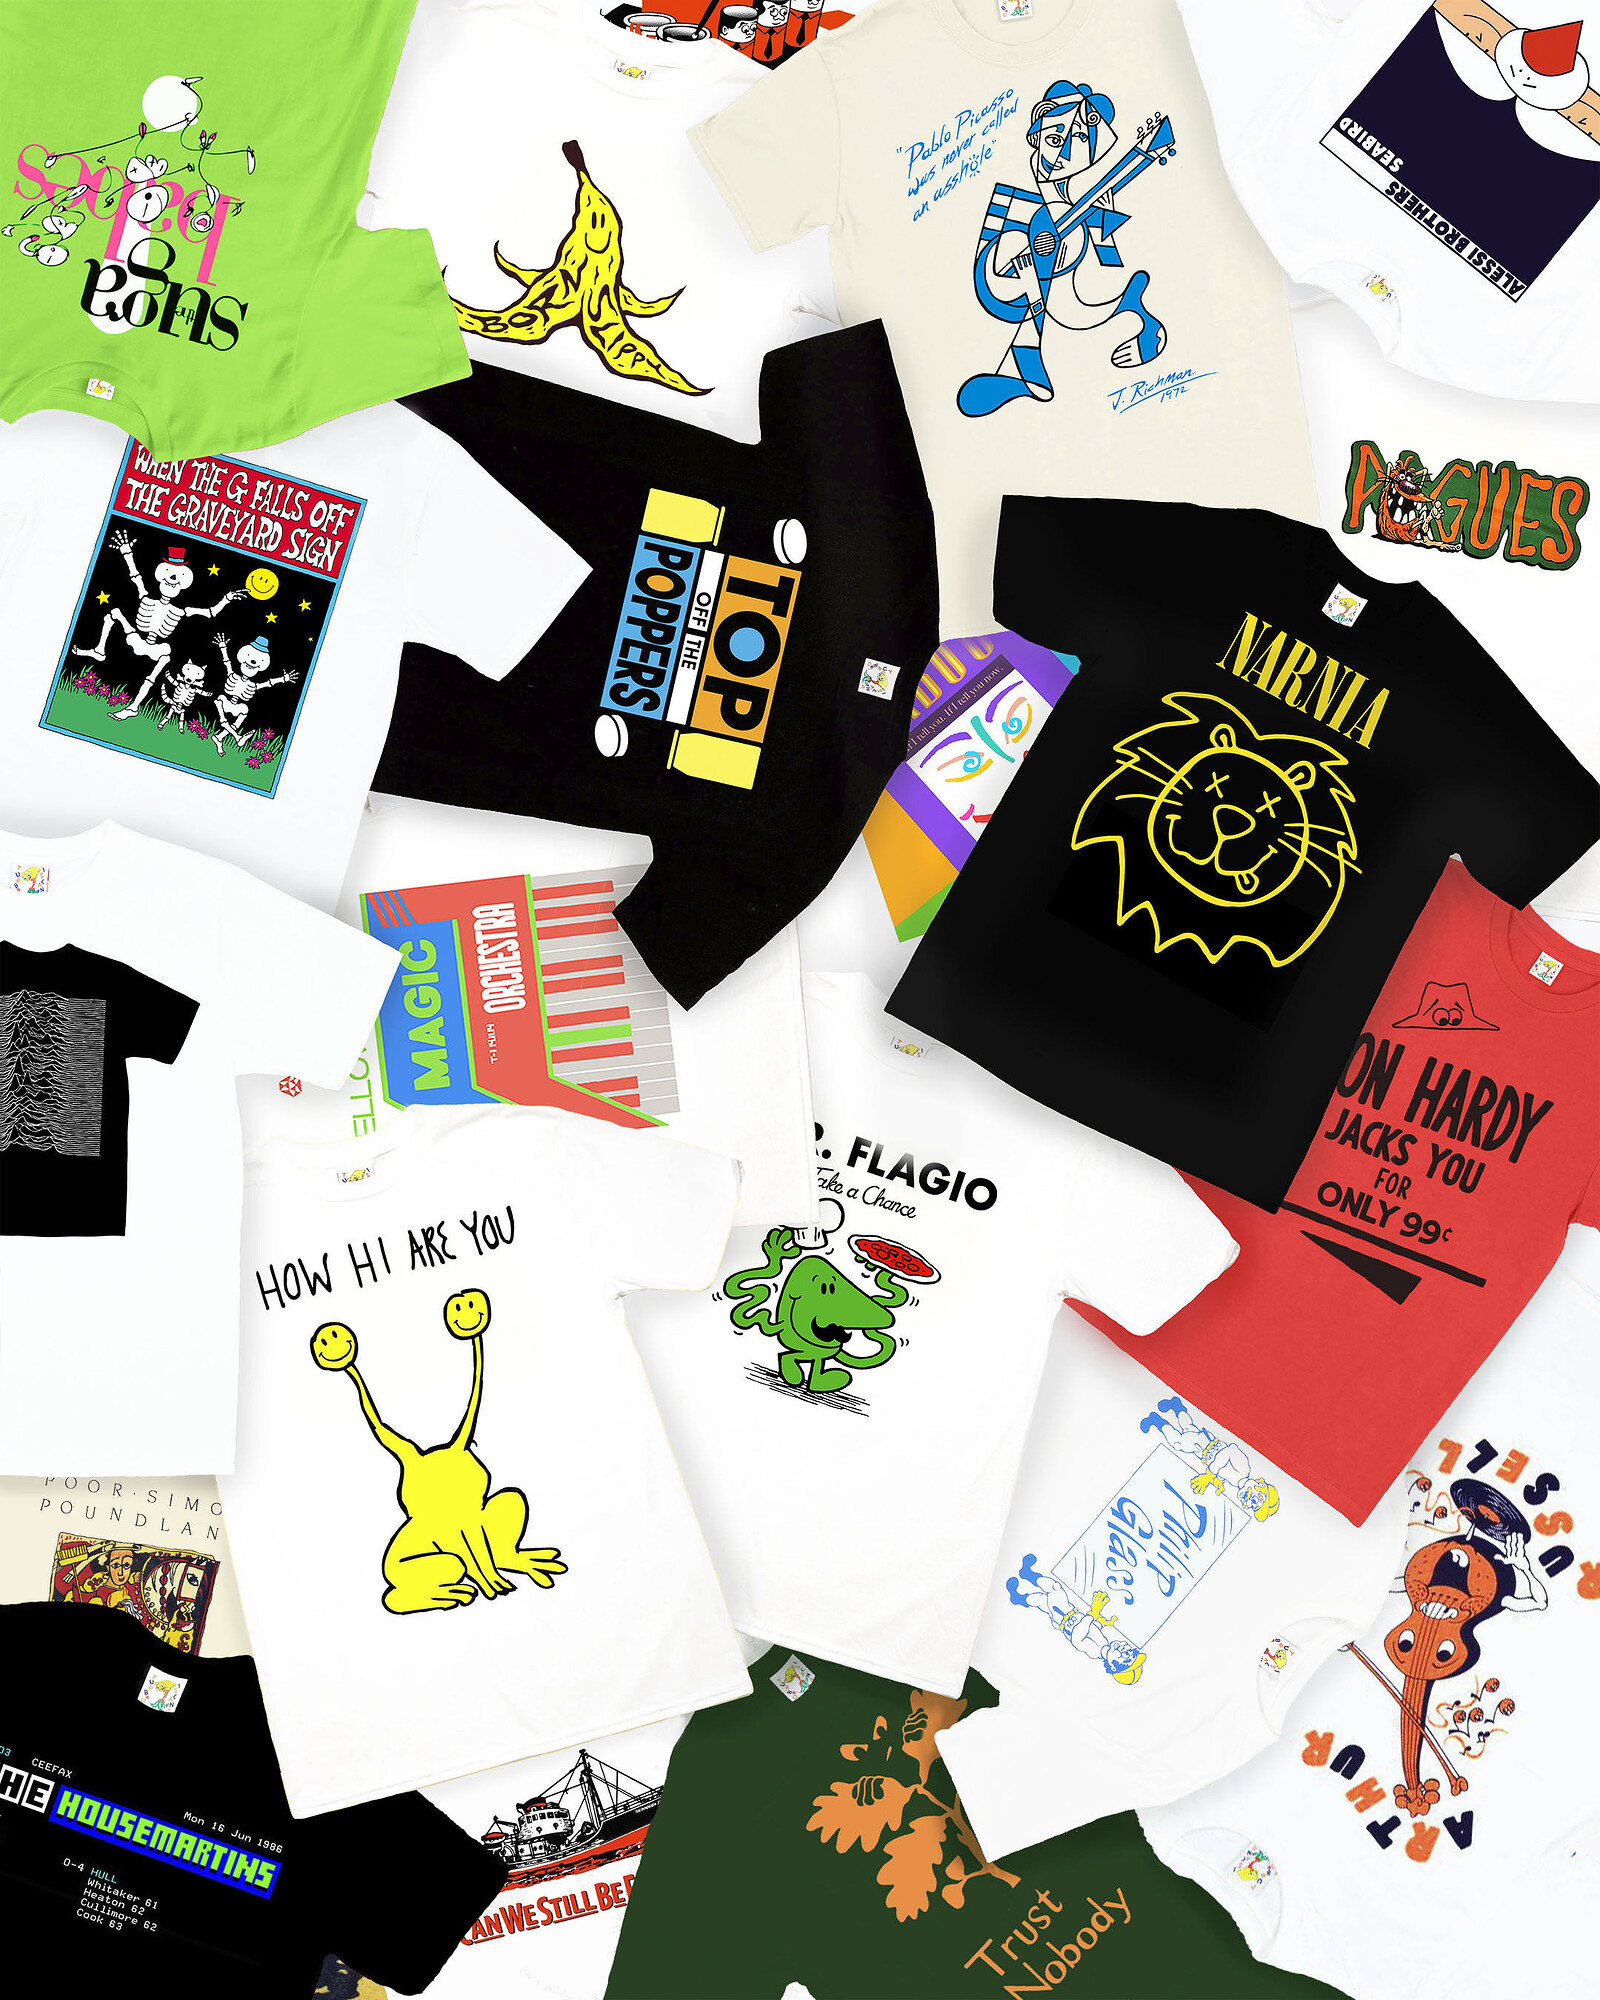 FINAL DAY of the TURBO ISLAND music tee exhibition at KIT FORM